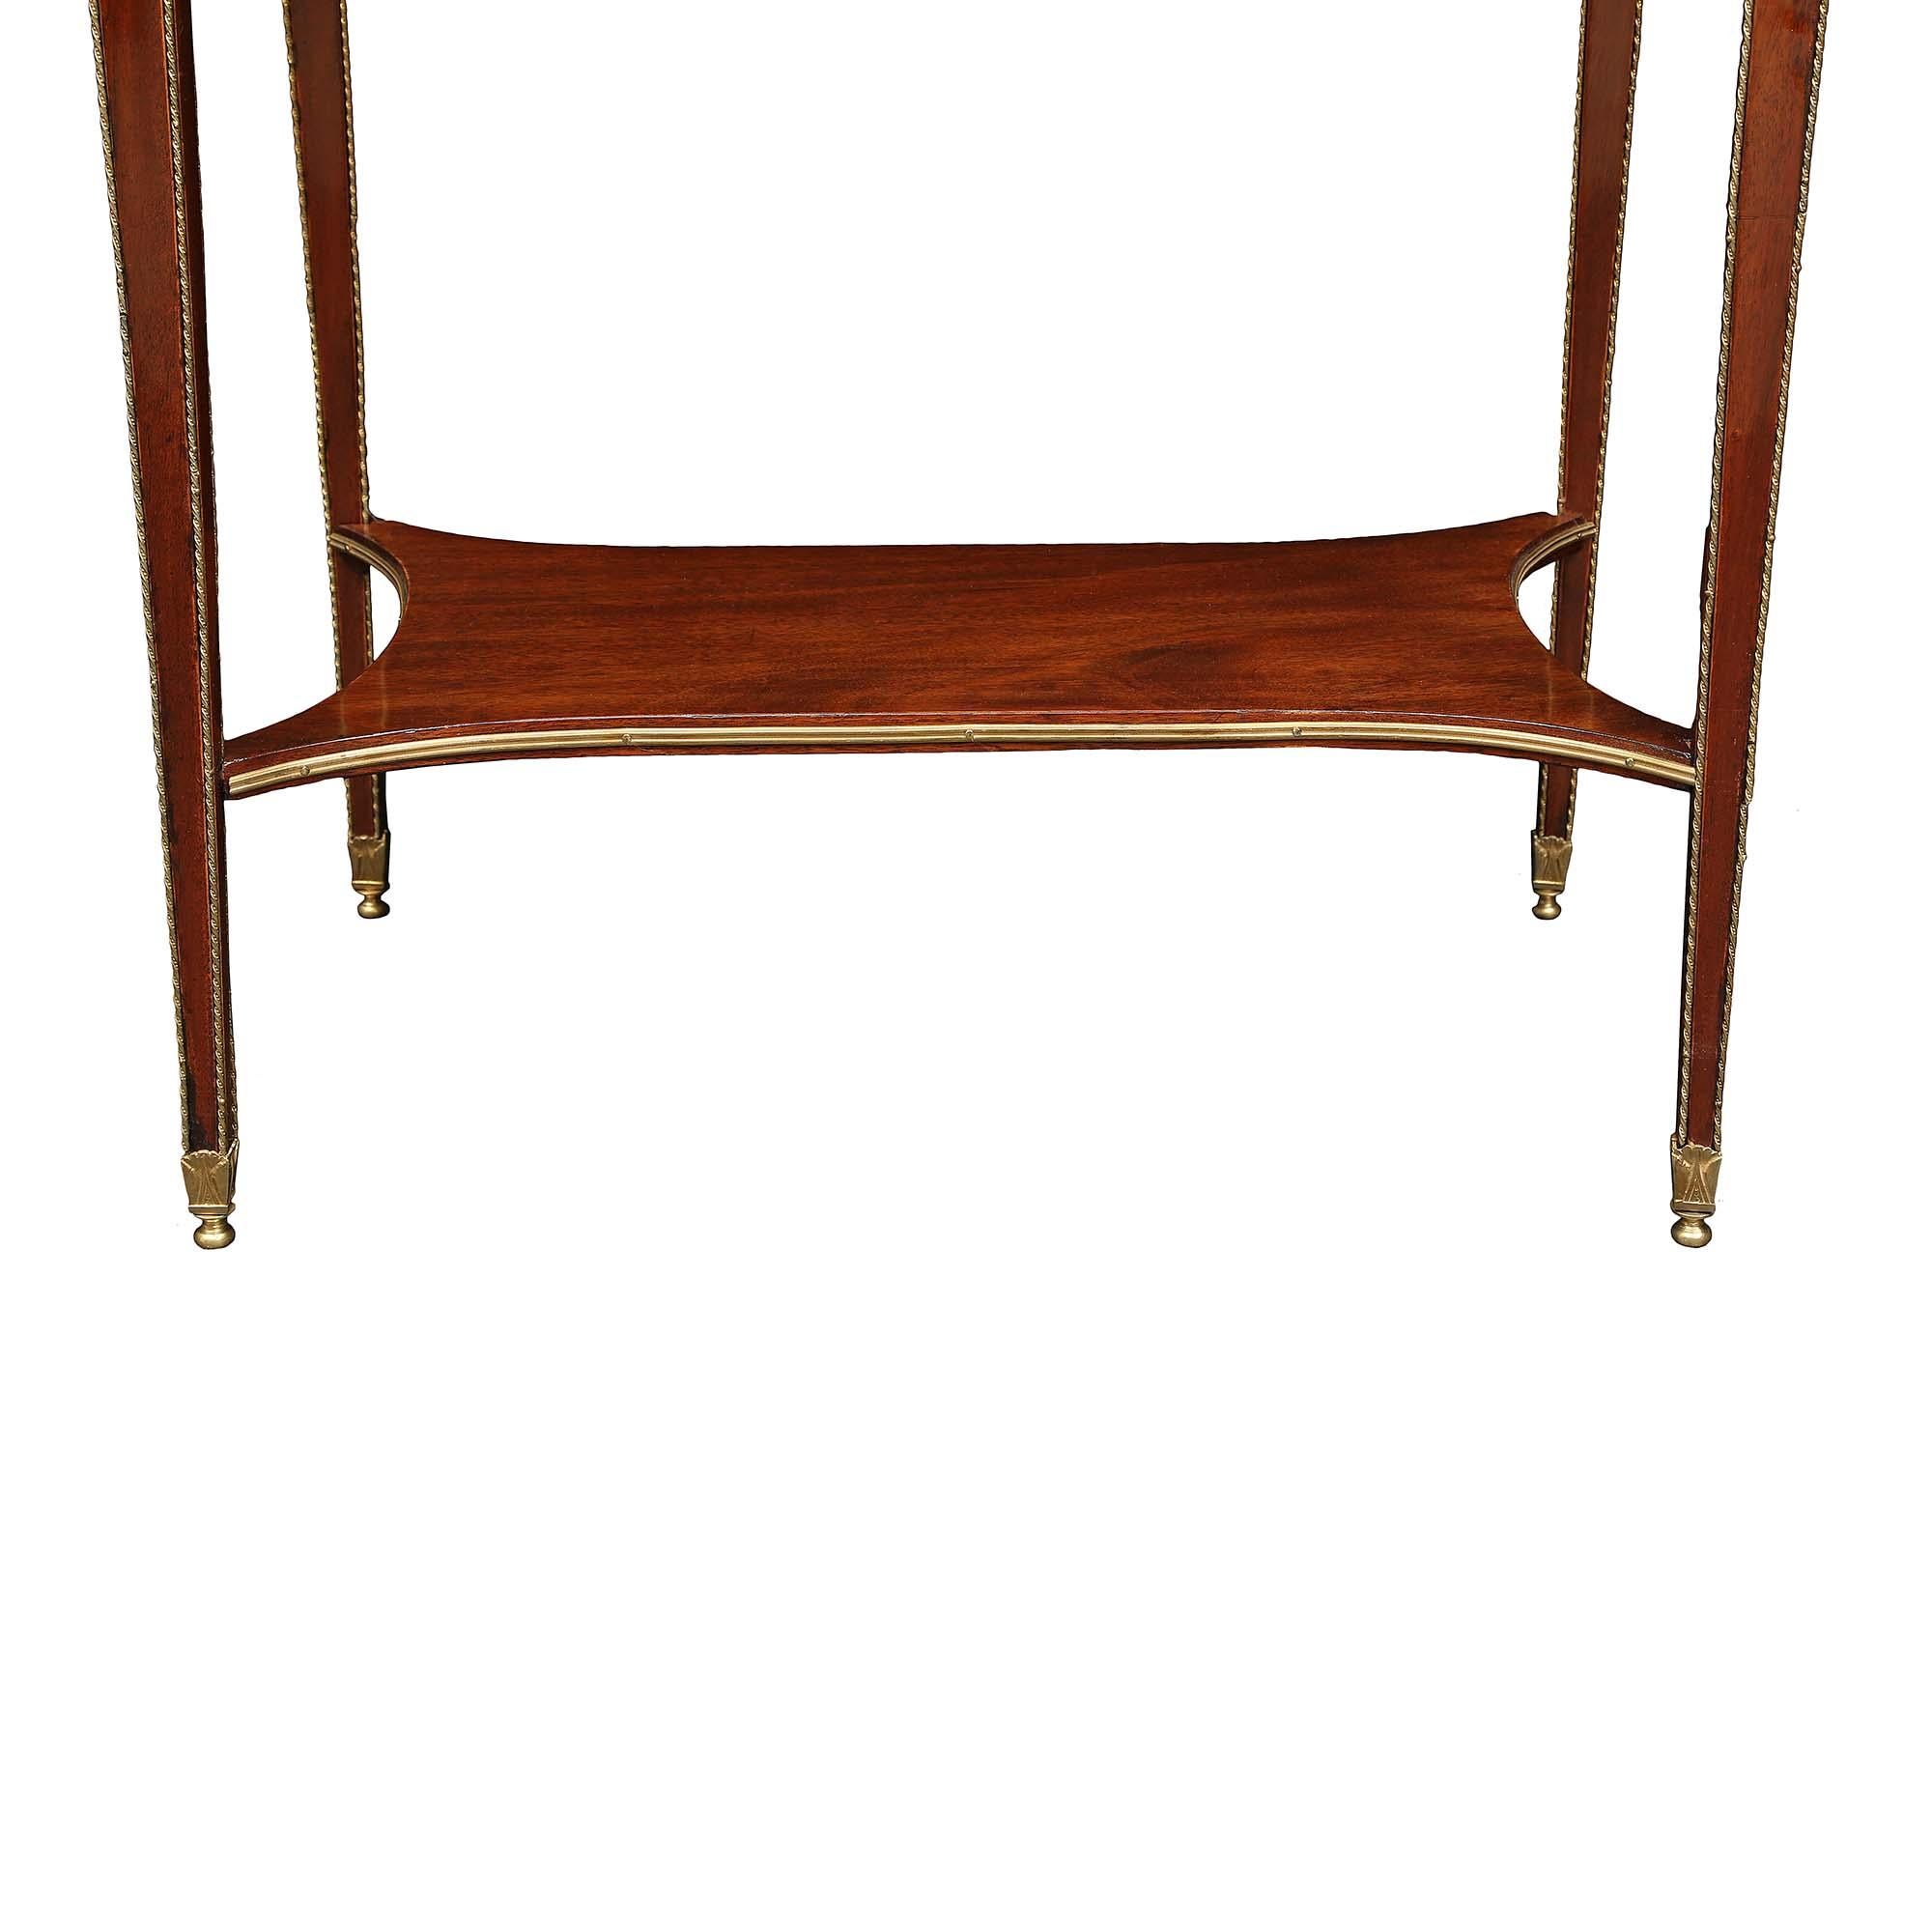 French Mid-19th Century Louis XVI Style Mahogany Rectangular Side Table For Sale 3